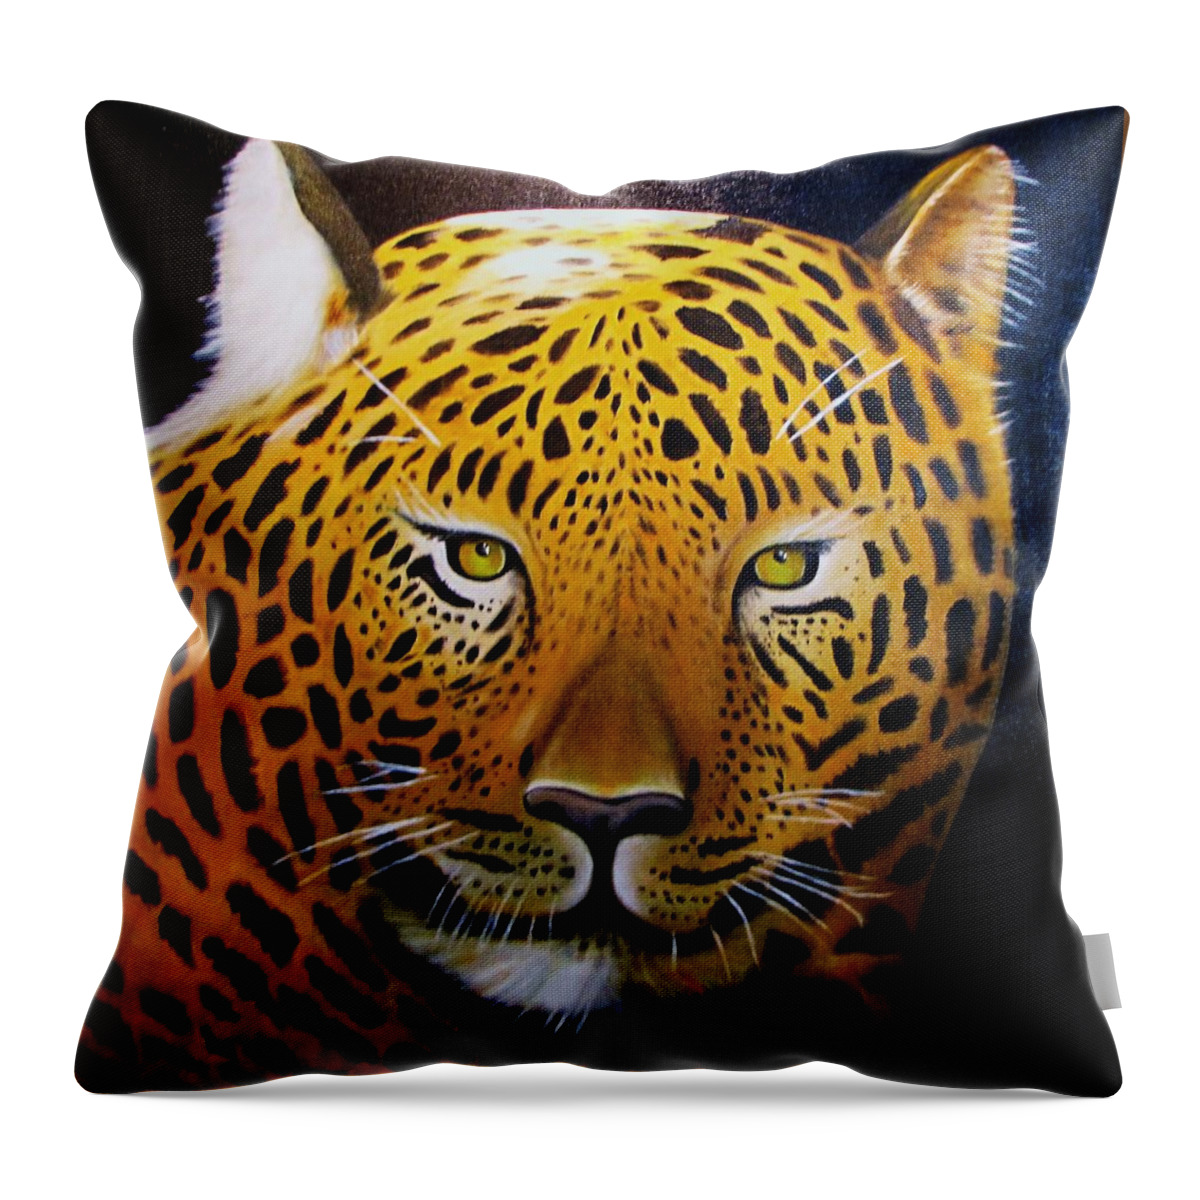 Leopard Throw Pillow featuring the painting Rowdy by Gene Gregory